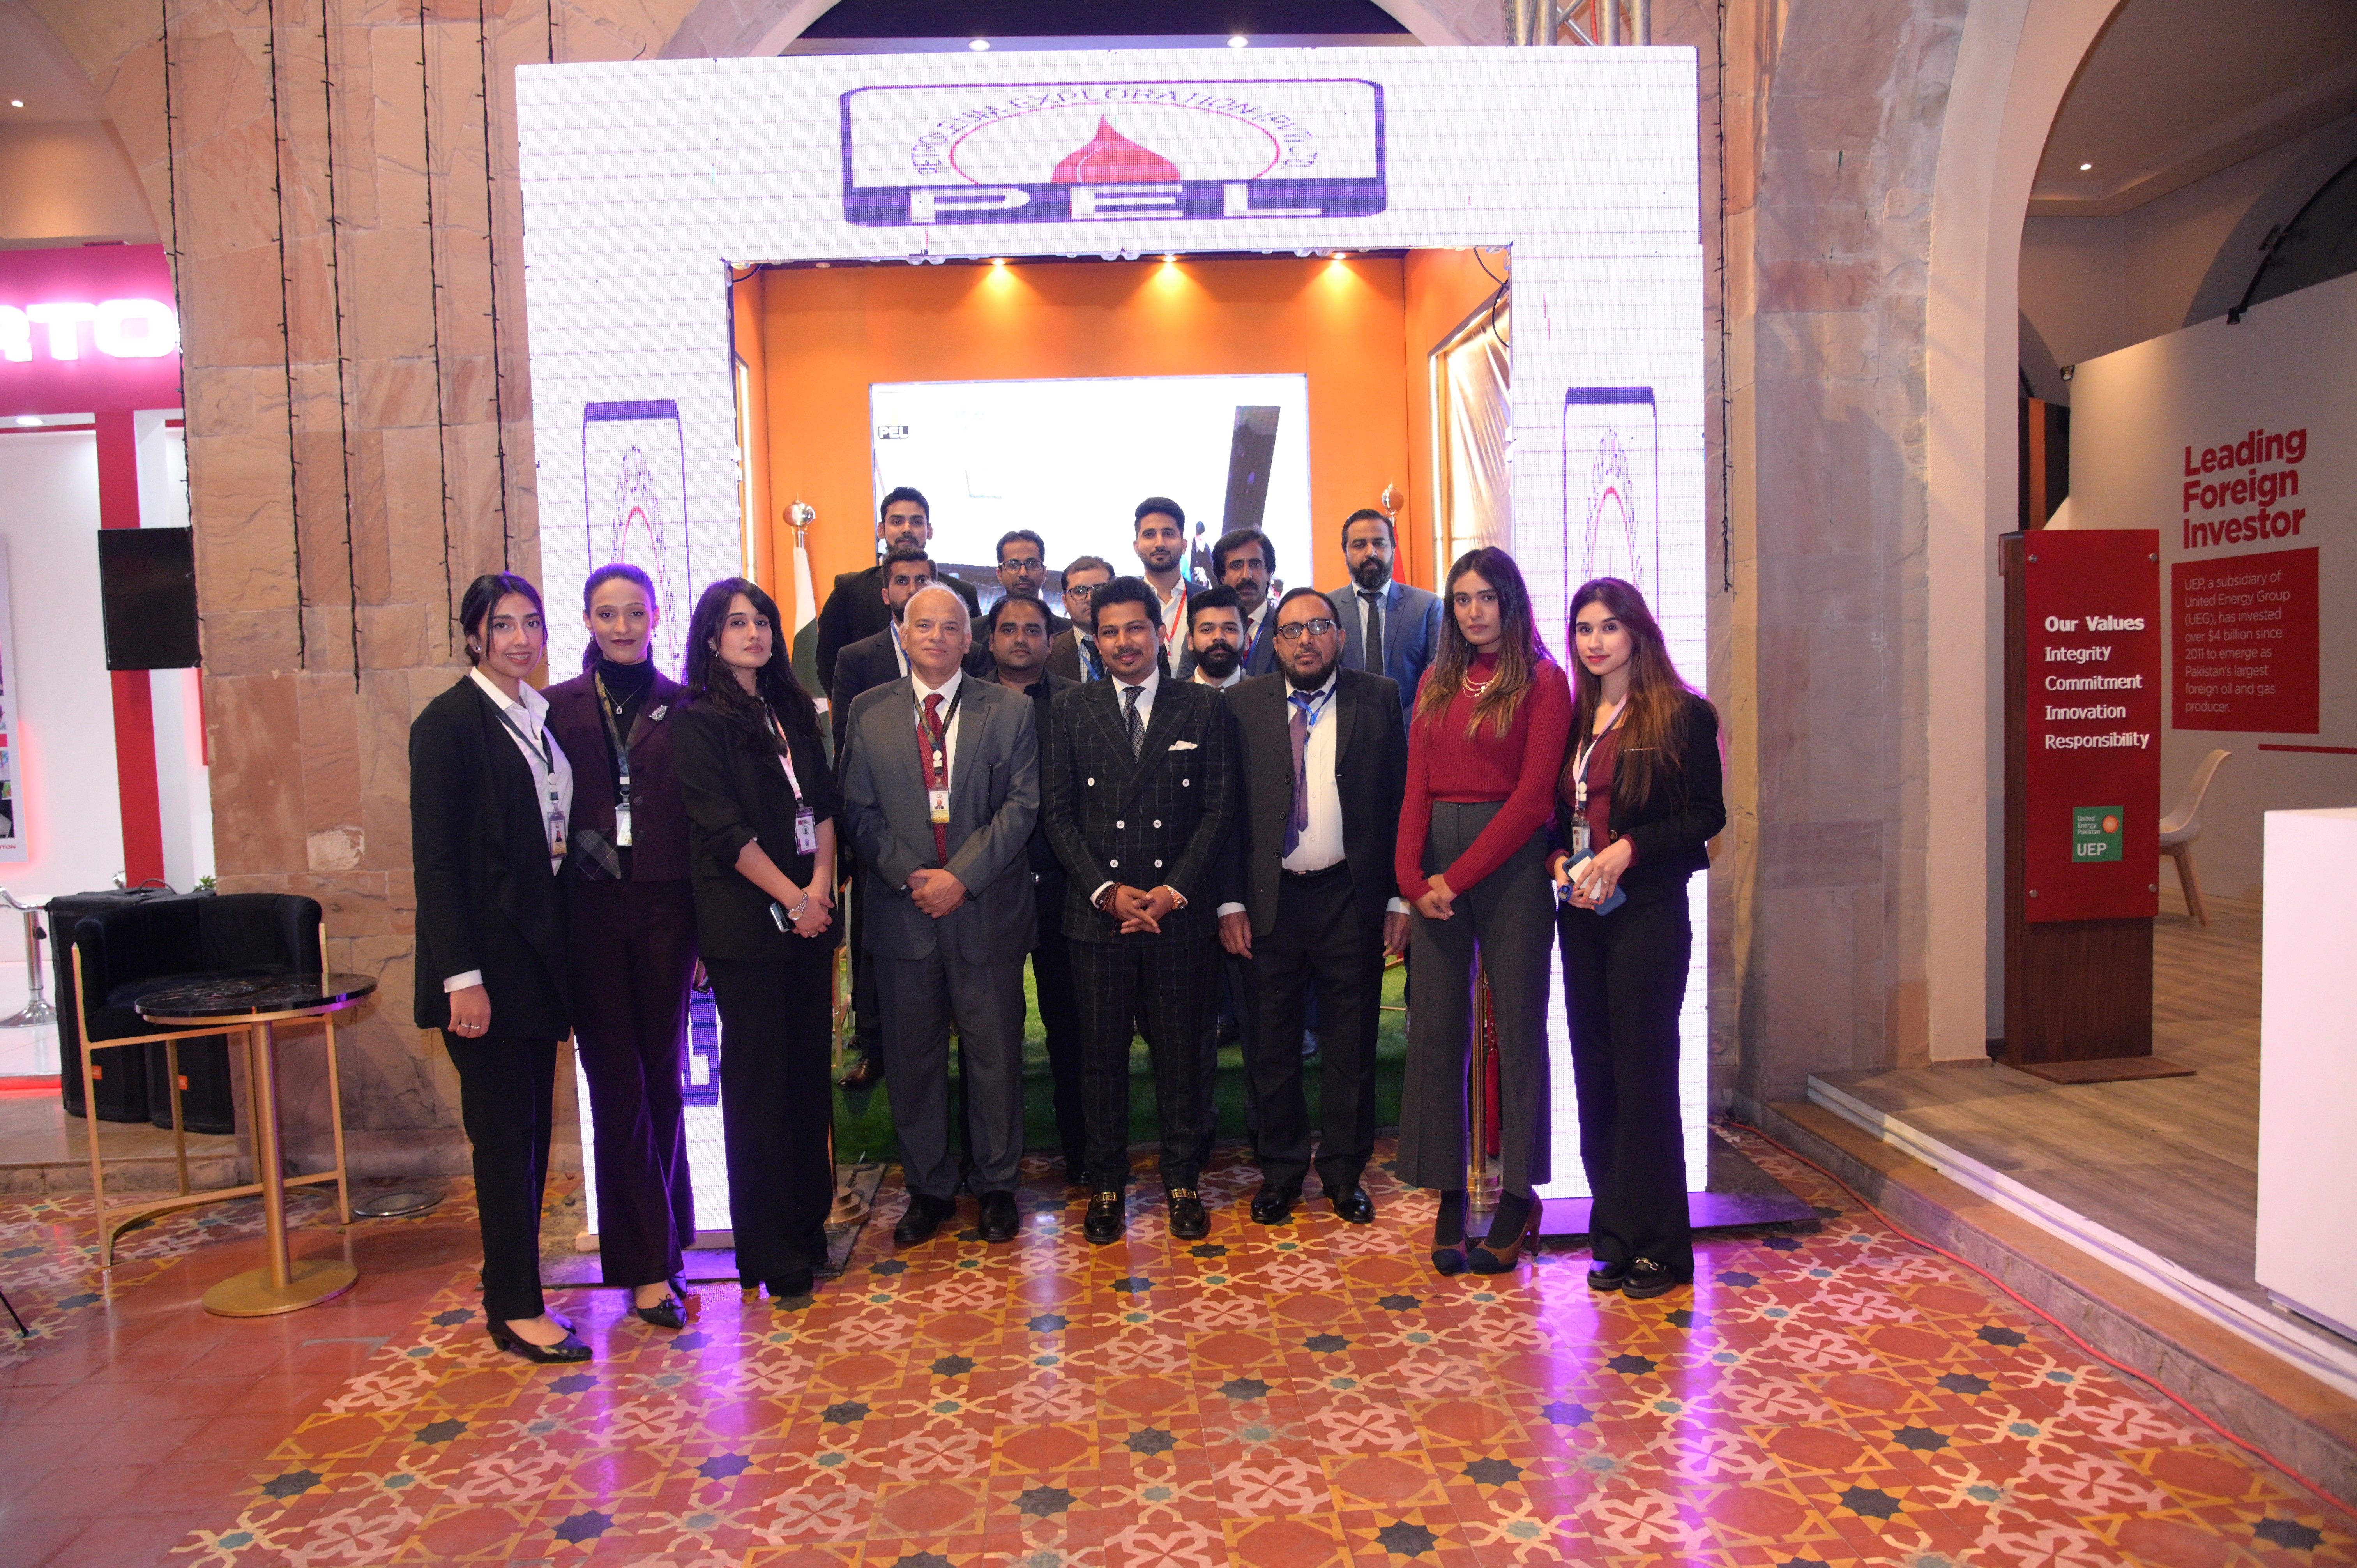 A  gropu photo of members of PEL Petroleum Exploration (Pvt) Ltd which is a subsidiary of the Shahzad International Group of Companies and is the Group's core business, Exploration and Produc